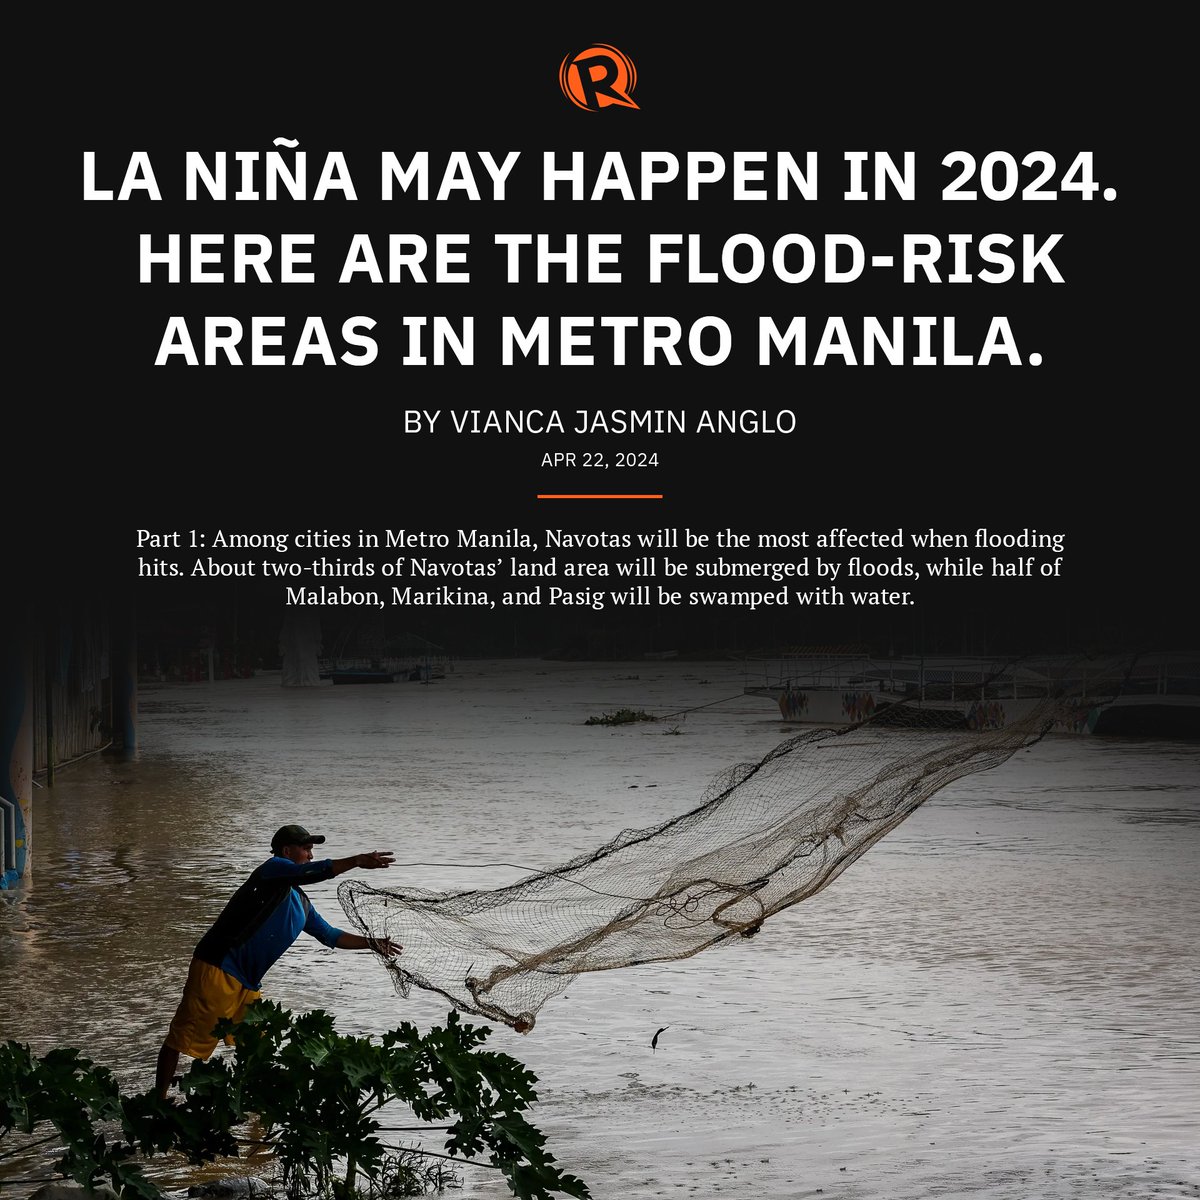 In the Philippines’ densest region, analysis of government data showed that barely one in 100 evacuation facilities are permanent shelters. At least 60 in every 100 of Metro Manila’s “evacuation centers” are schools and basketball courts. READ: trib.al/w0gupy4